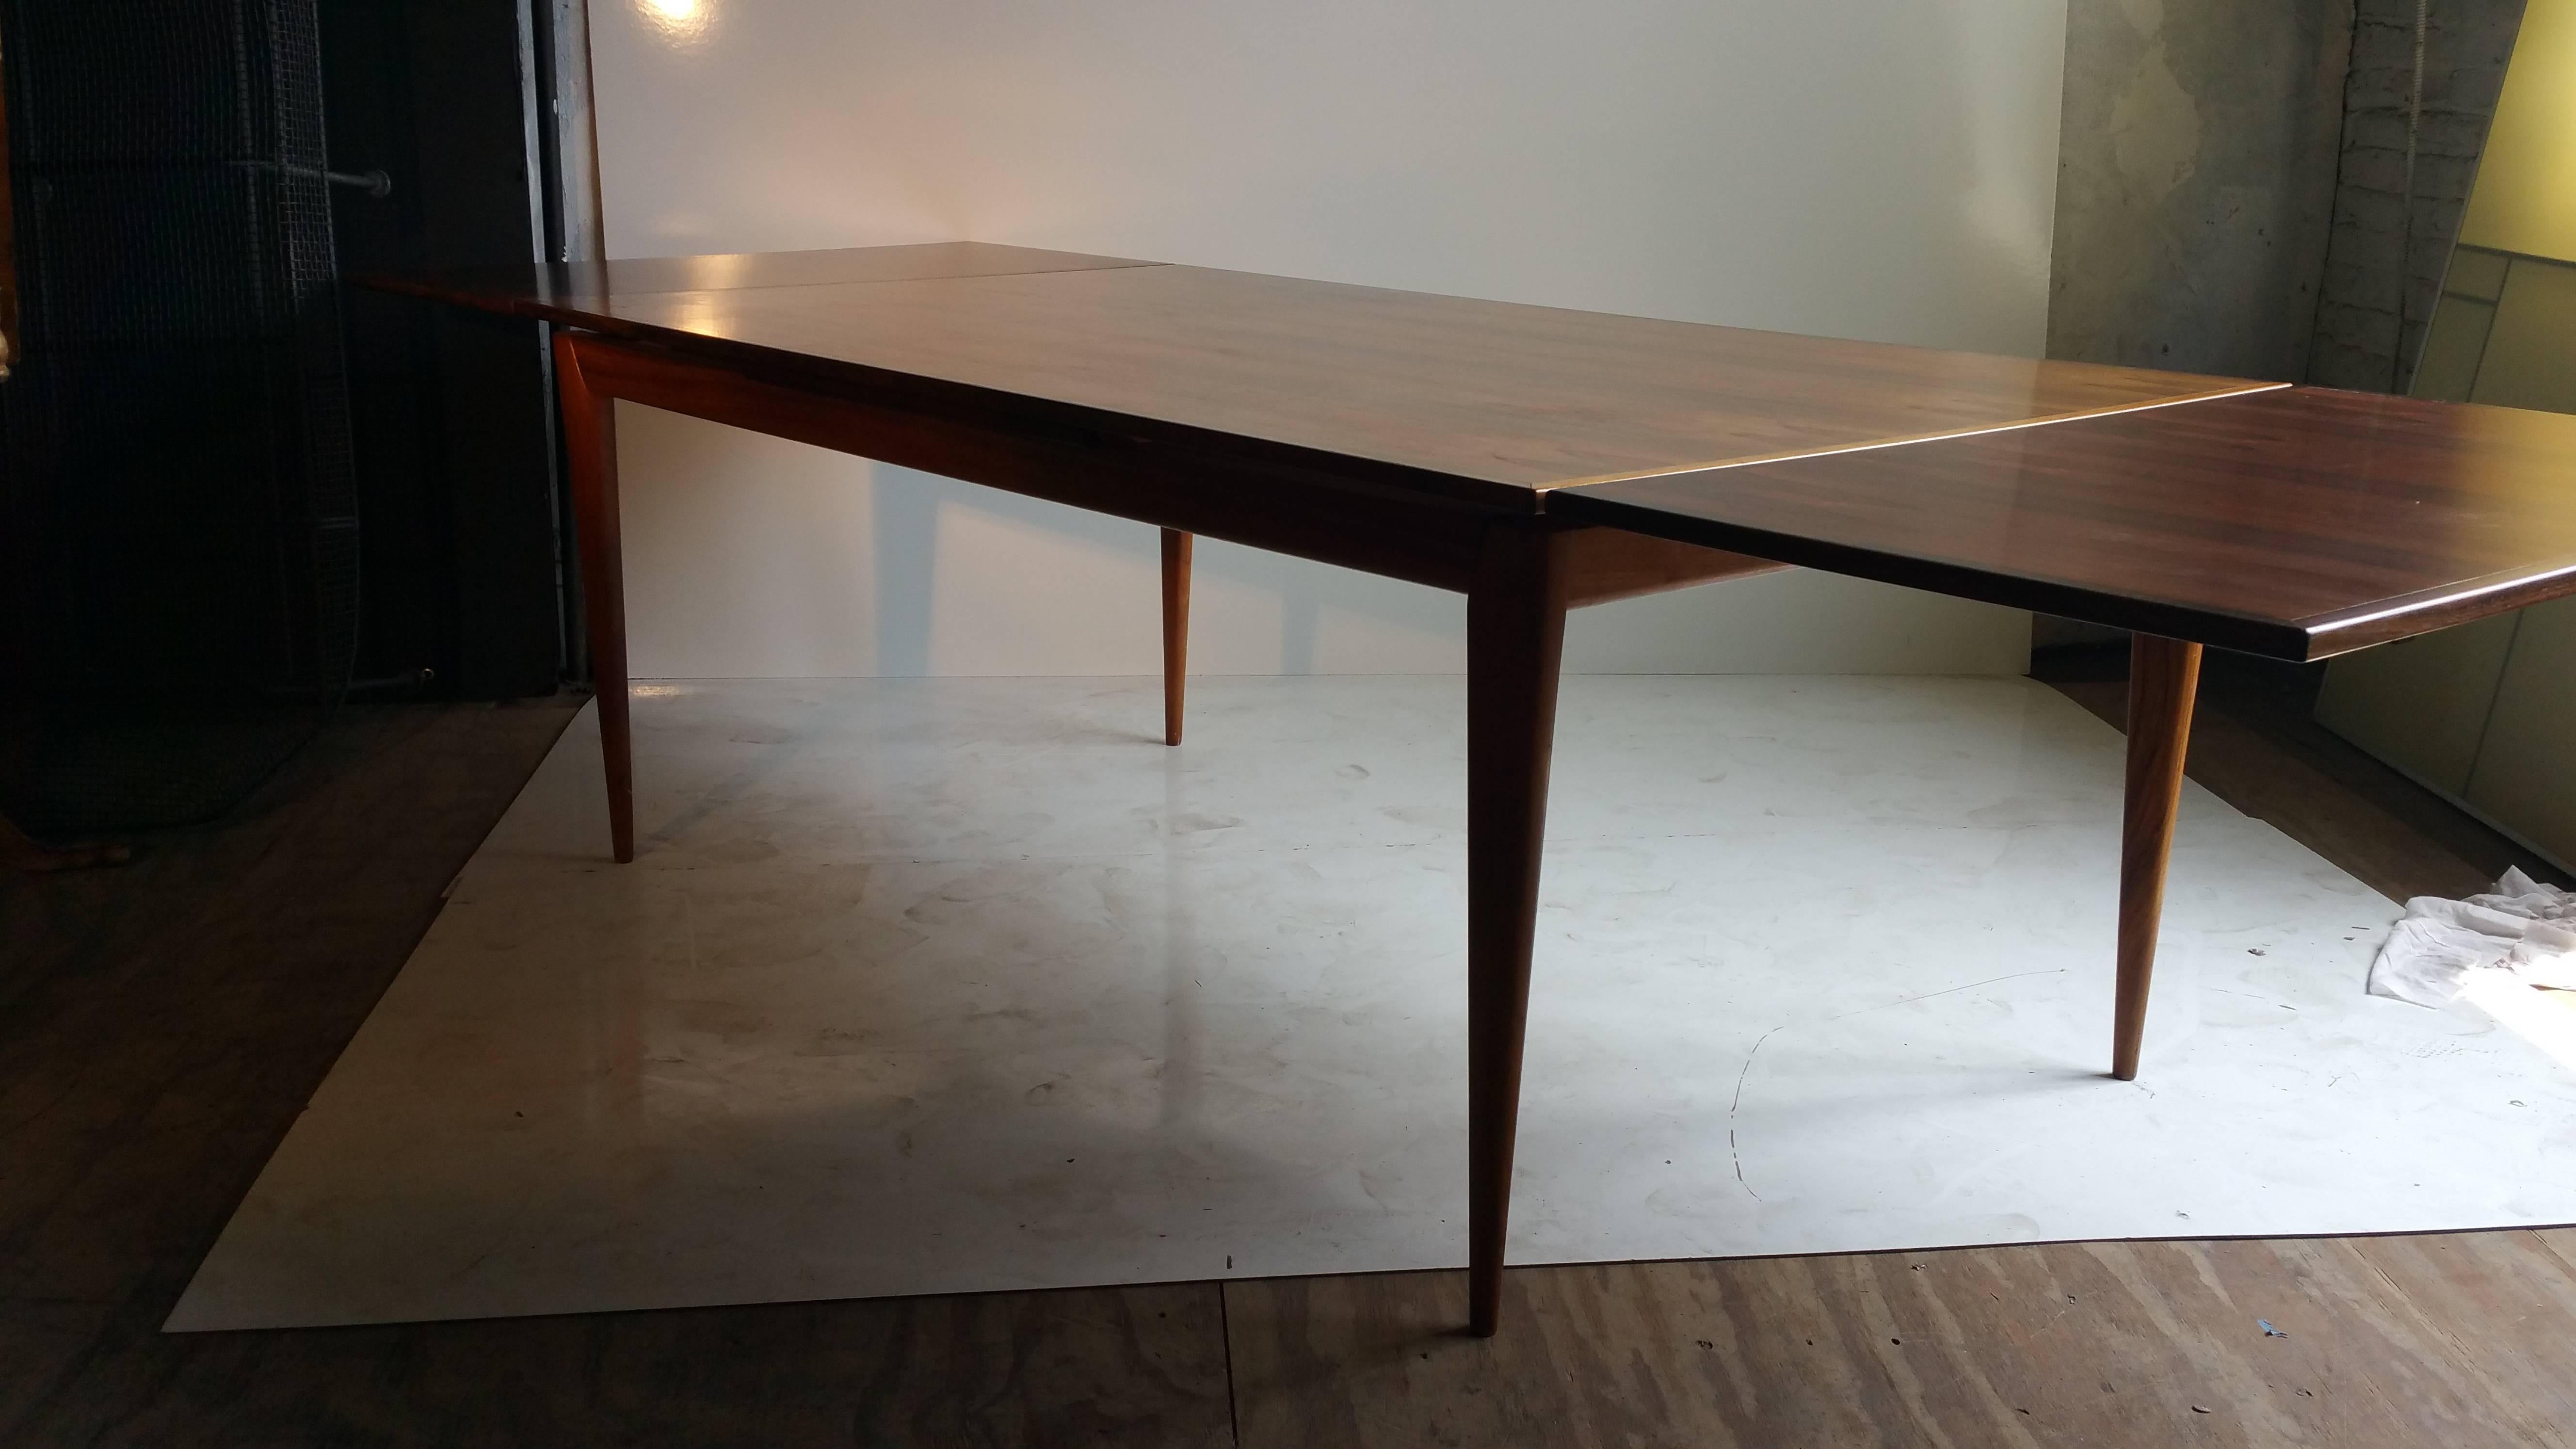 Danish modern rectangular draw leaf dining table will make a fantastic addition to any modern dining room. This 'Model 9' table was designed by Niels Otto Møller for J.L. Møller. Crafted in Brazilian rosewood, this piece features bookmatched rich